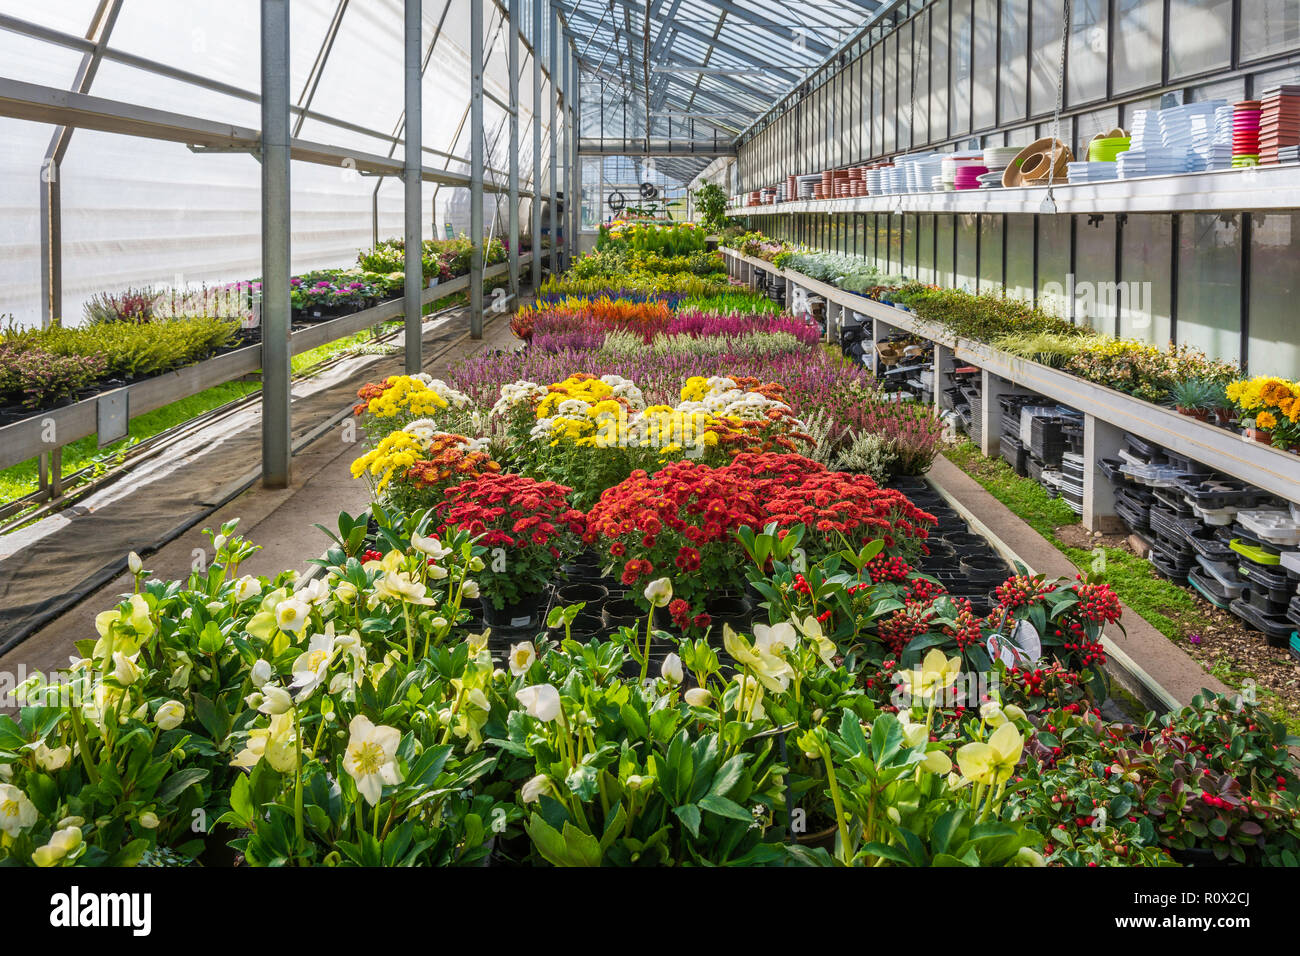 Interior Of An Large Greenhouse With Blossoming Seasonal Flowers And Plants Nursery Flowers And Plants For Sale Trento Northern Italy Europe Stock Photo Alamy